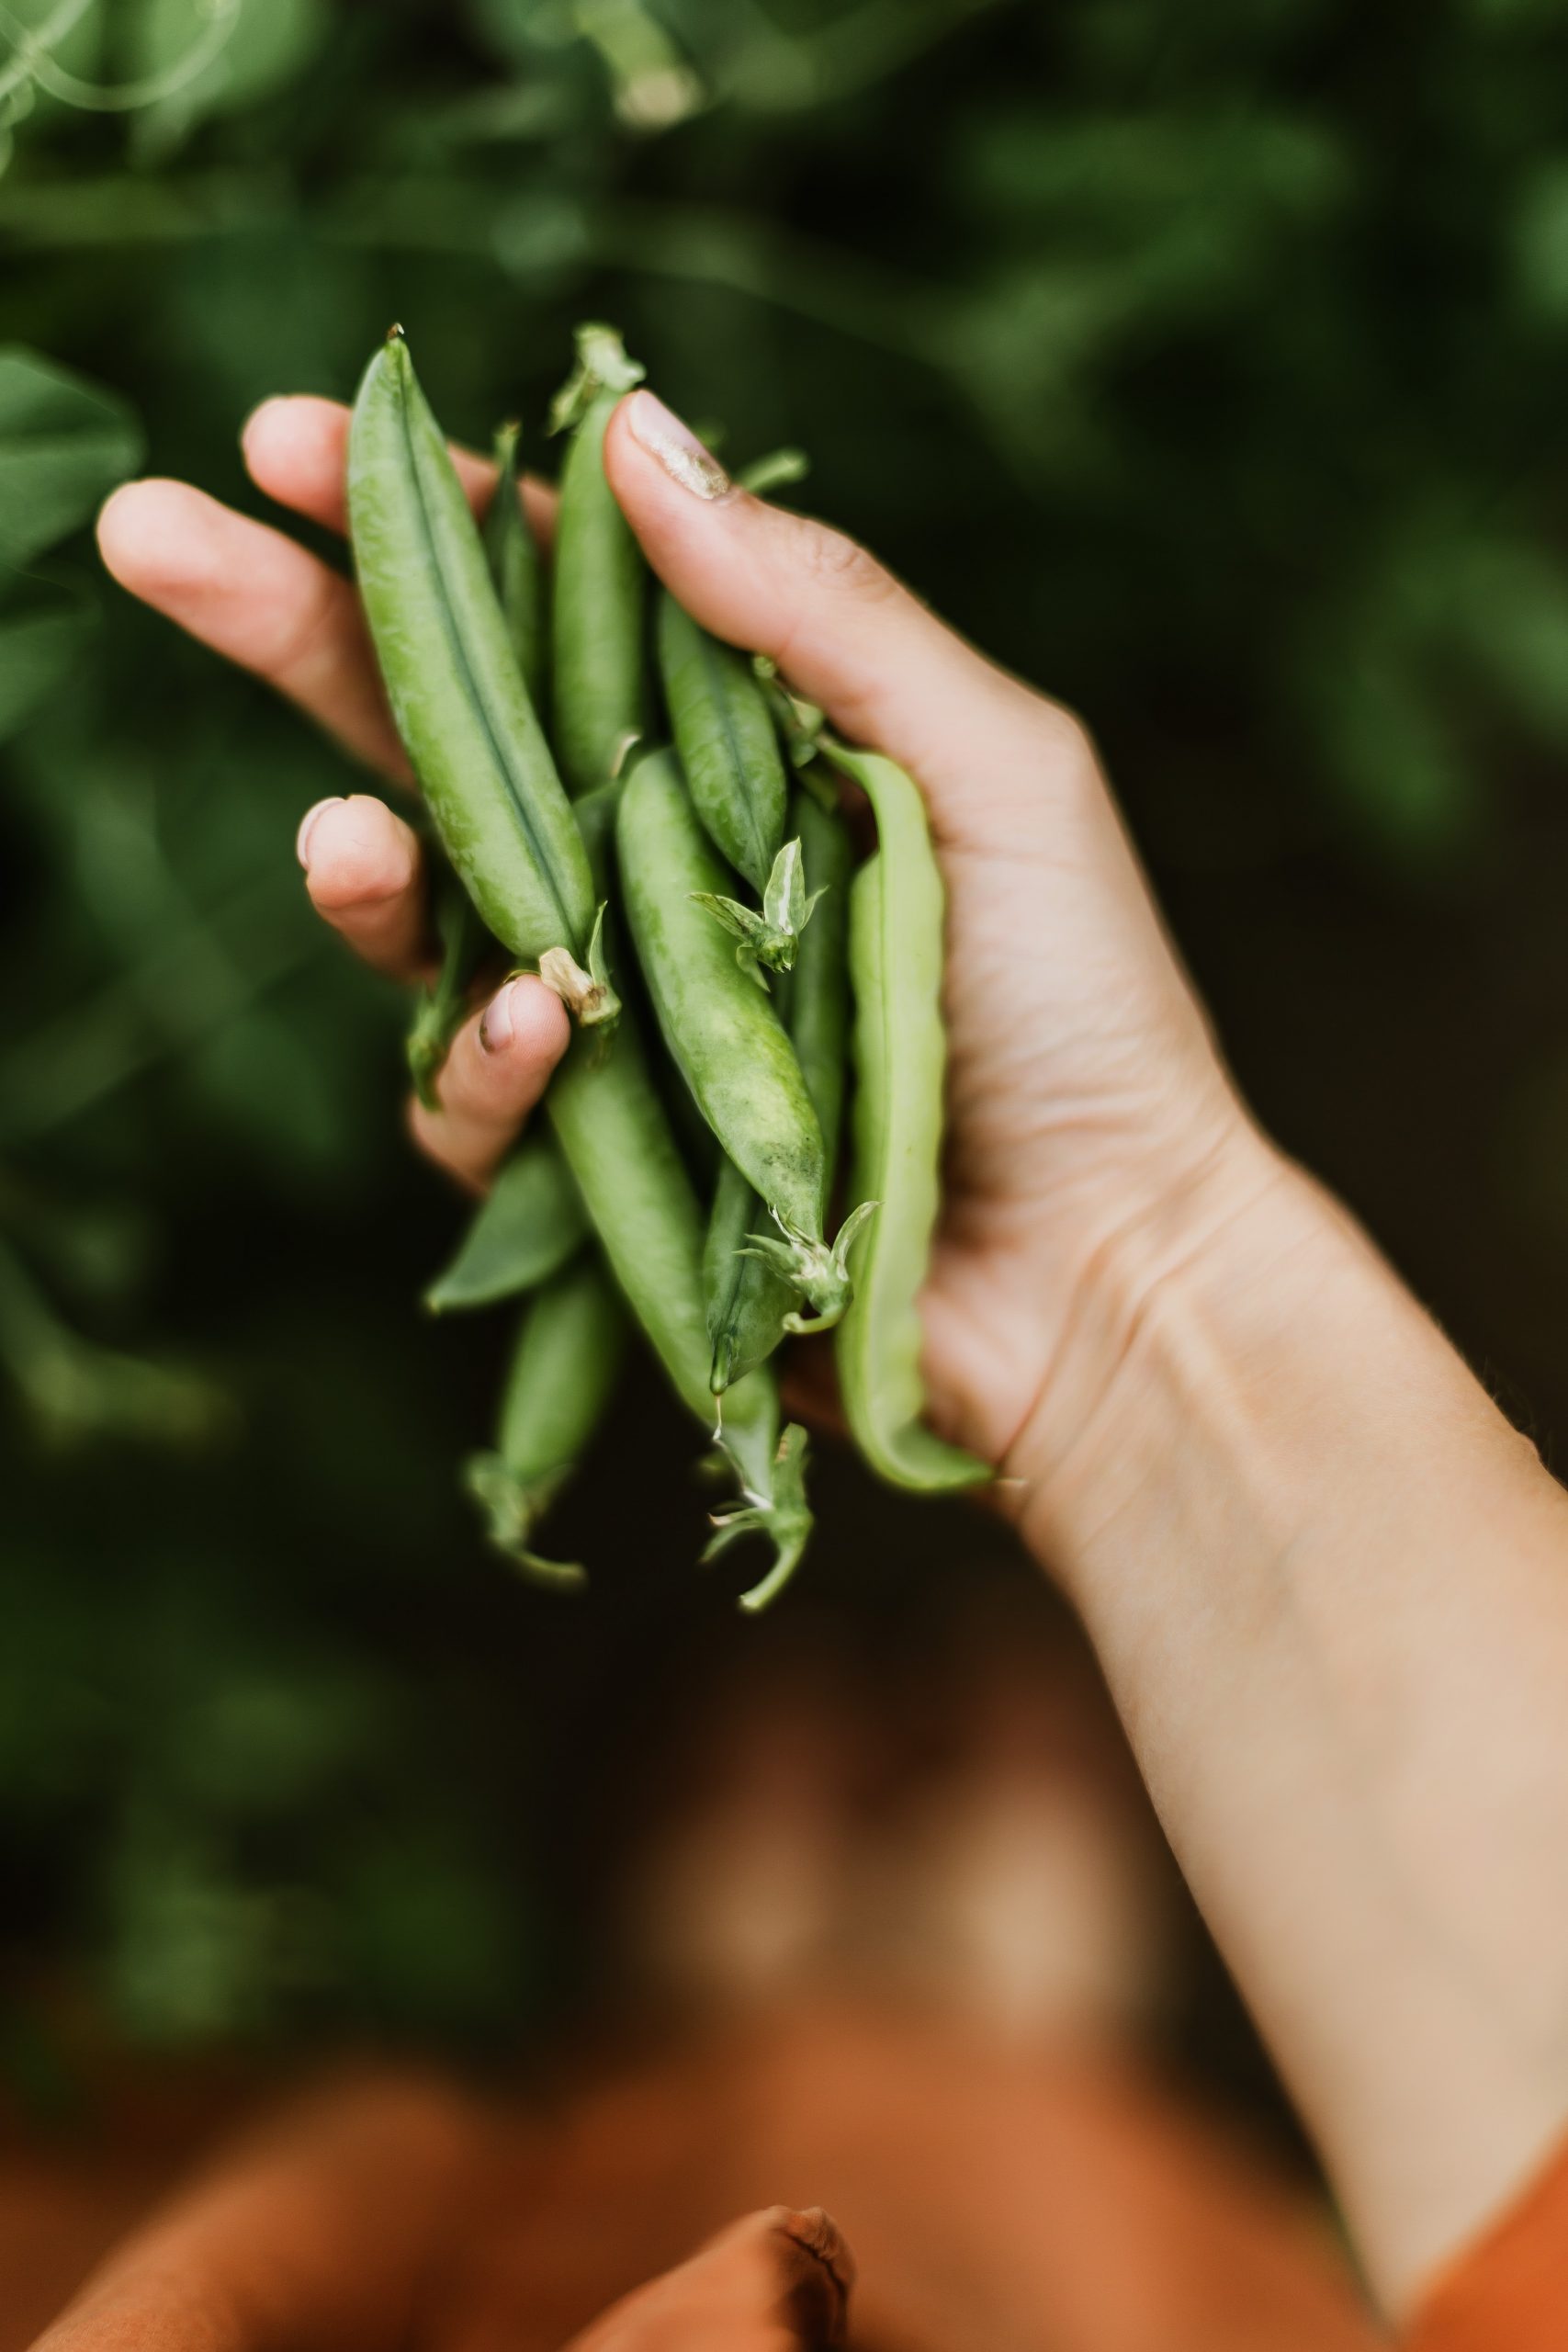 What Is The Difference Between Green Beans And Sugar Snap Peas?